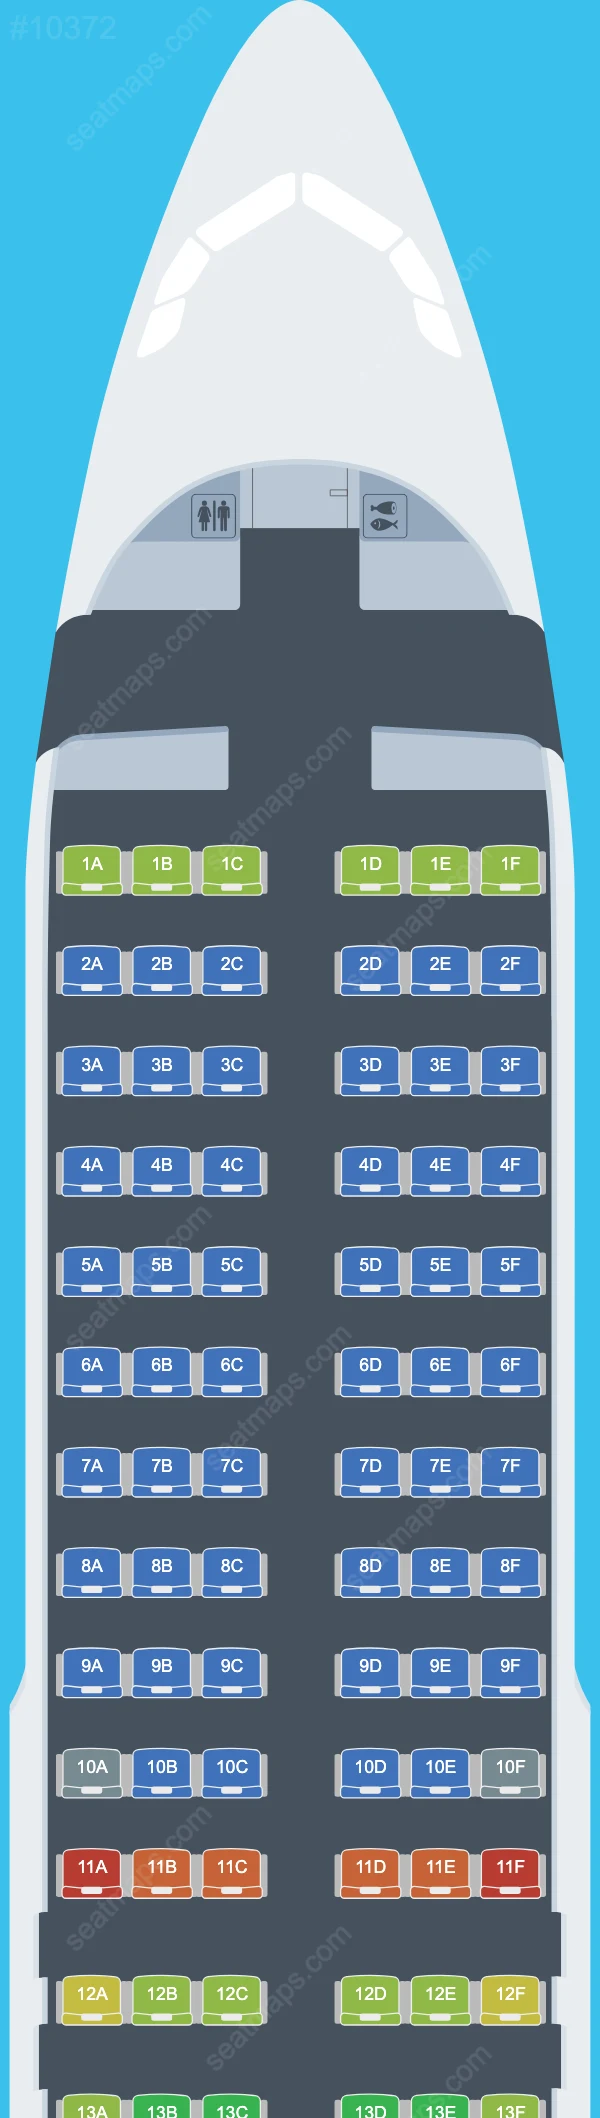 China Express Airlines Airbus A320-200neo seatmap preview